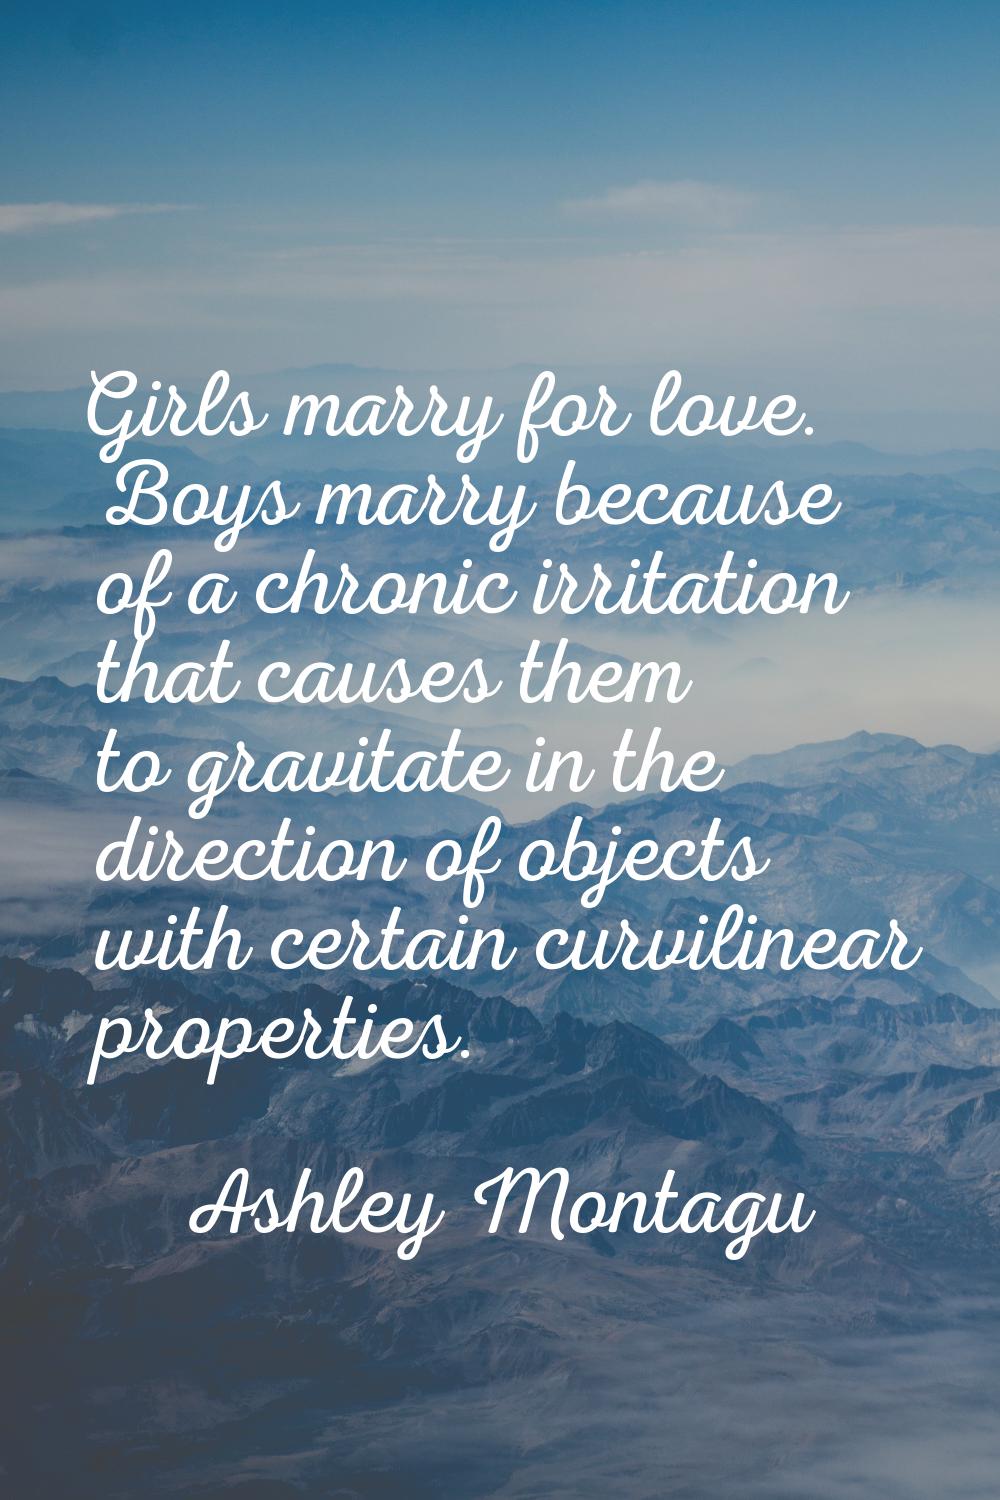 Girls marry for love. Boys marry because of a chronic irritation that causes them to gravitate in t